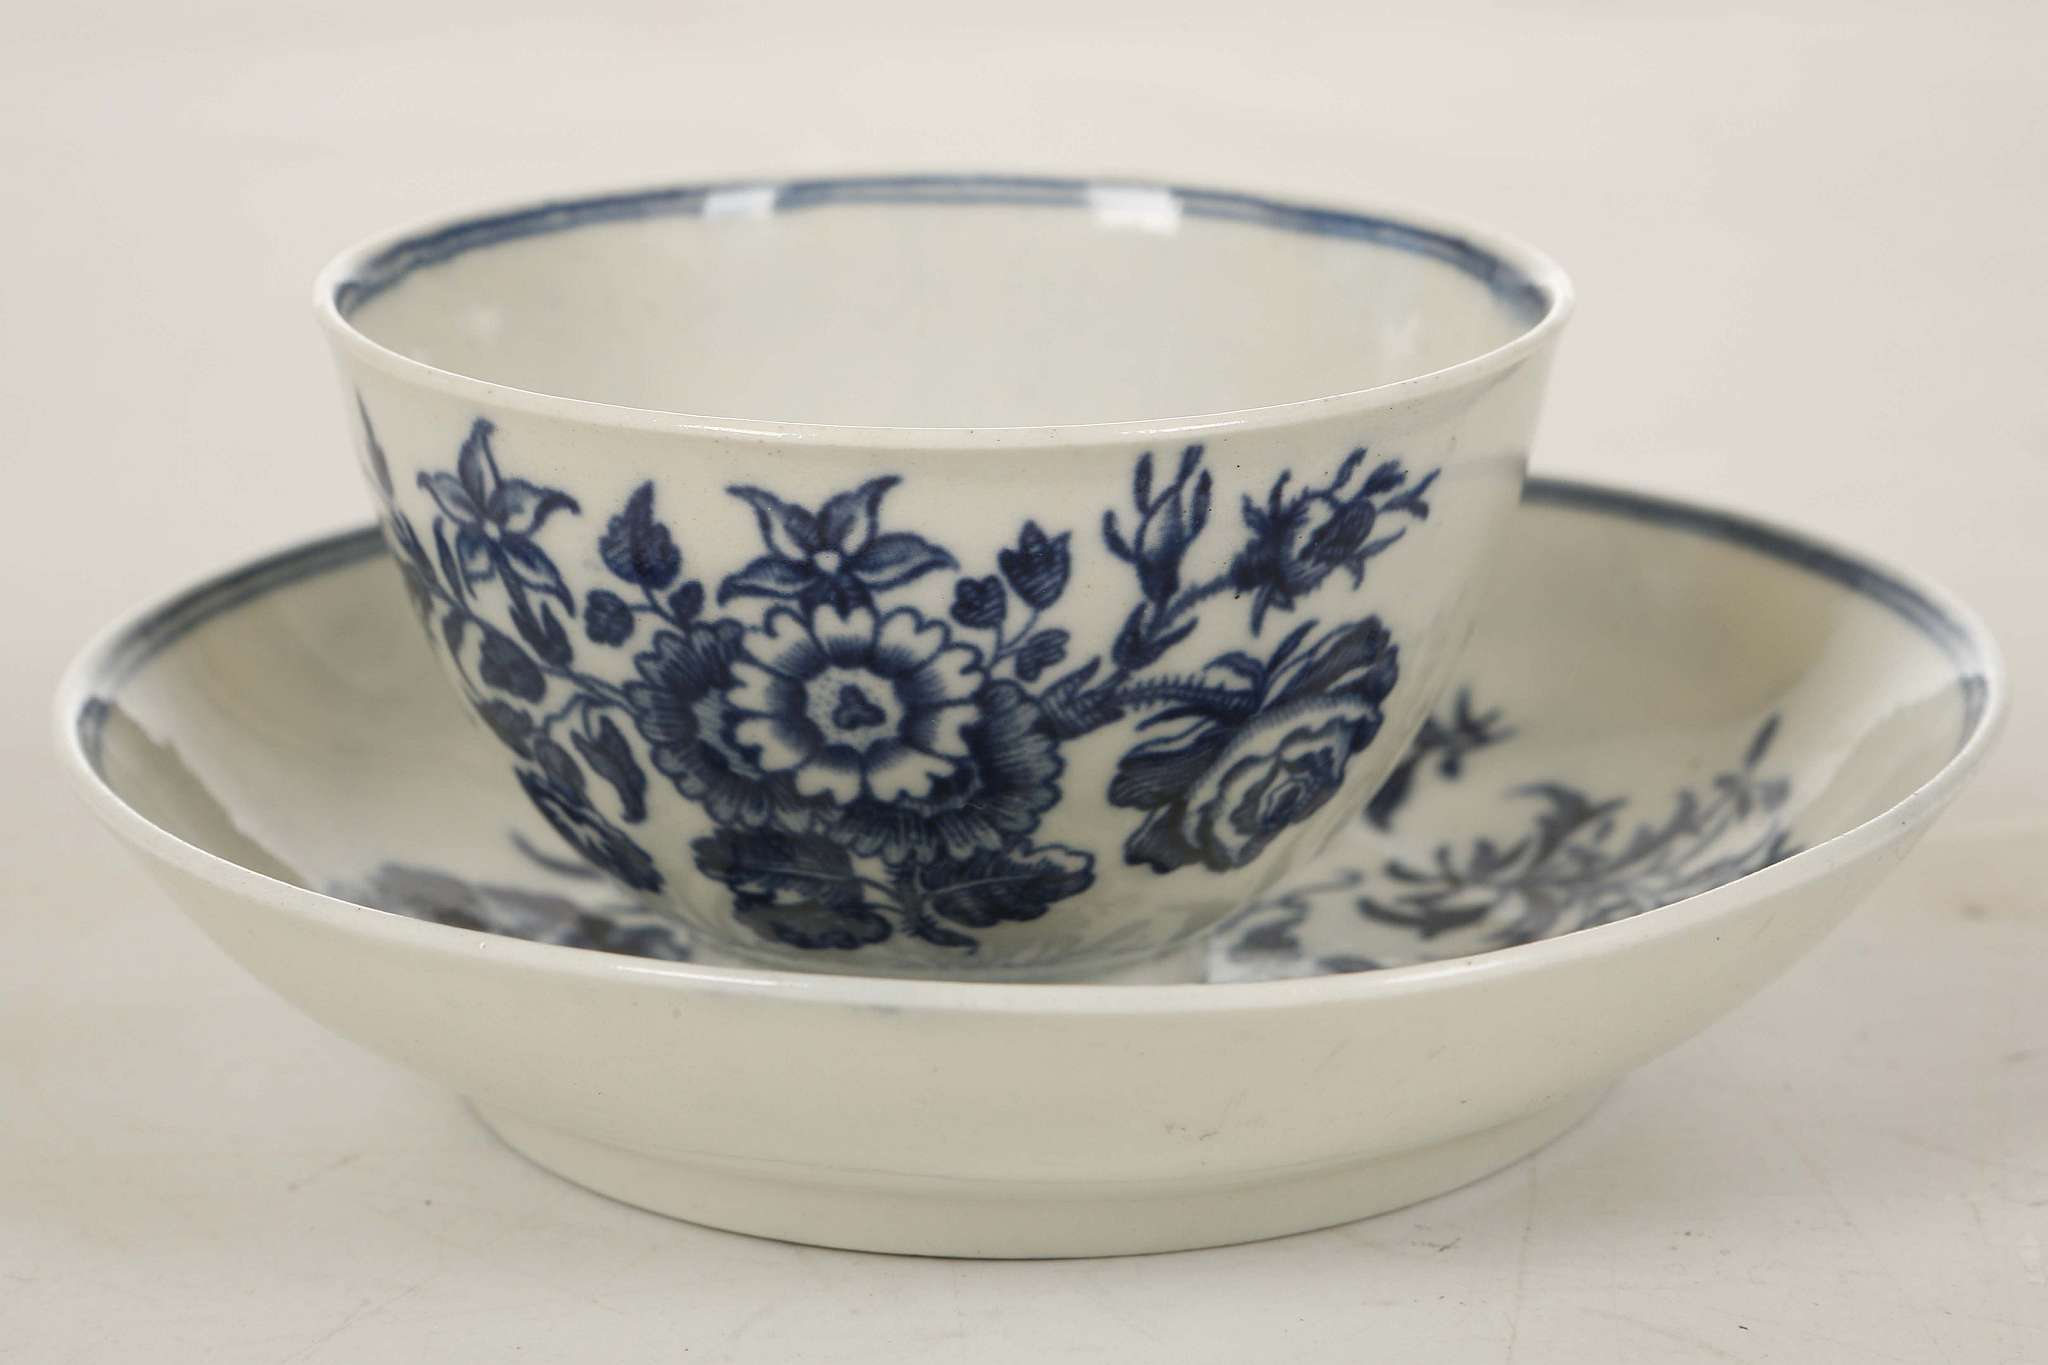 A WORCESTER TEABOWL AND SAUCER, circa 1770, printed in blue with the 'Three Flowers' pattern (the